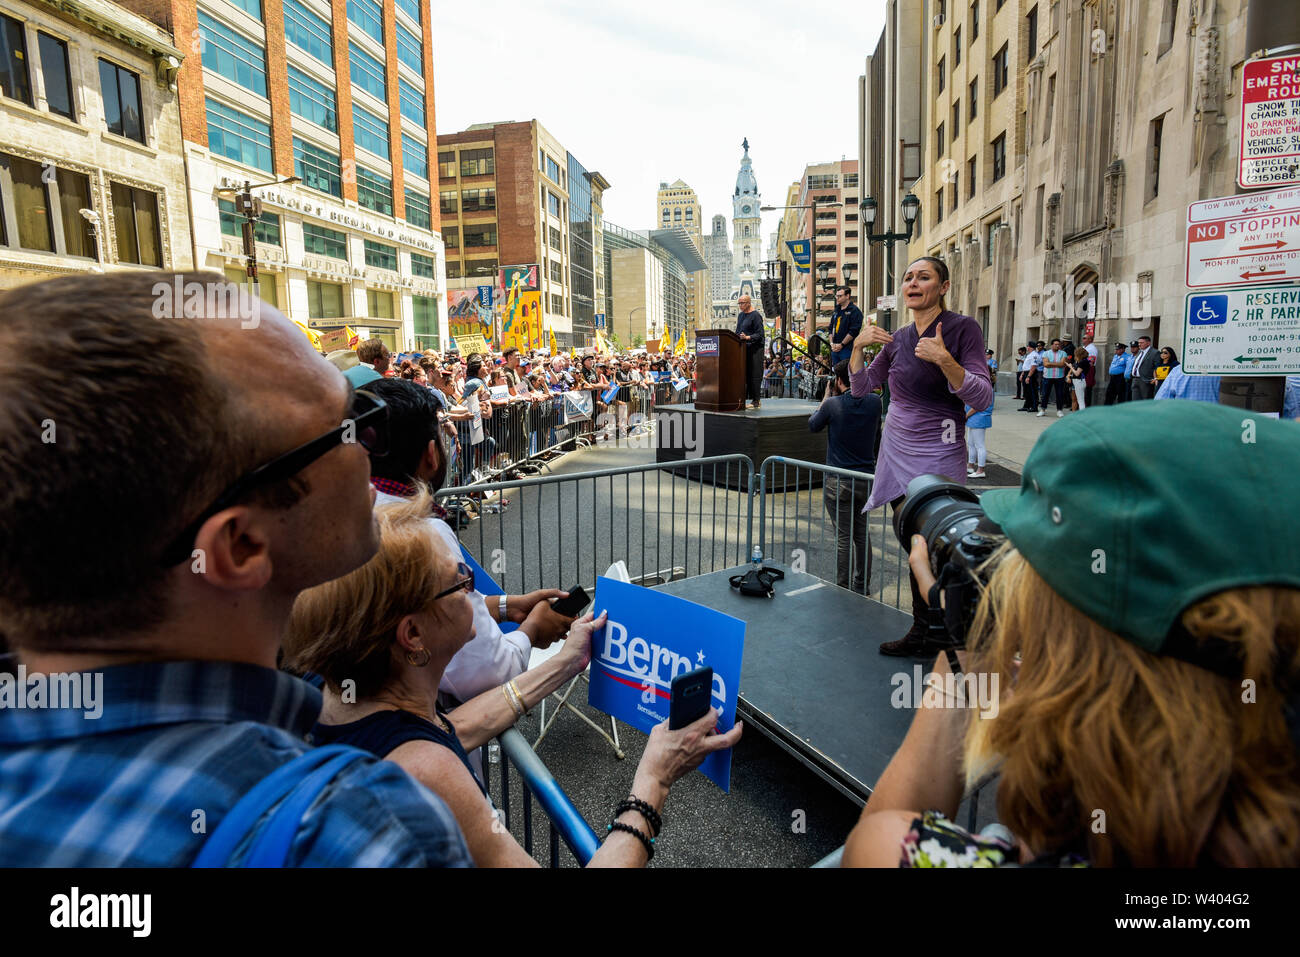 Philadelphia, Pennsylvania / USA. Pediatric Physician's Assistant and oncology patient, Maria Garcia Bulkley address a large crowd in front of Hahnemann University Hospital. July 15, 2019. Photo Credit: Chris Baker Evens. Stock Photo